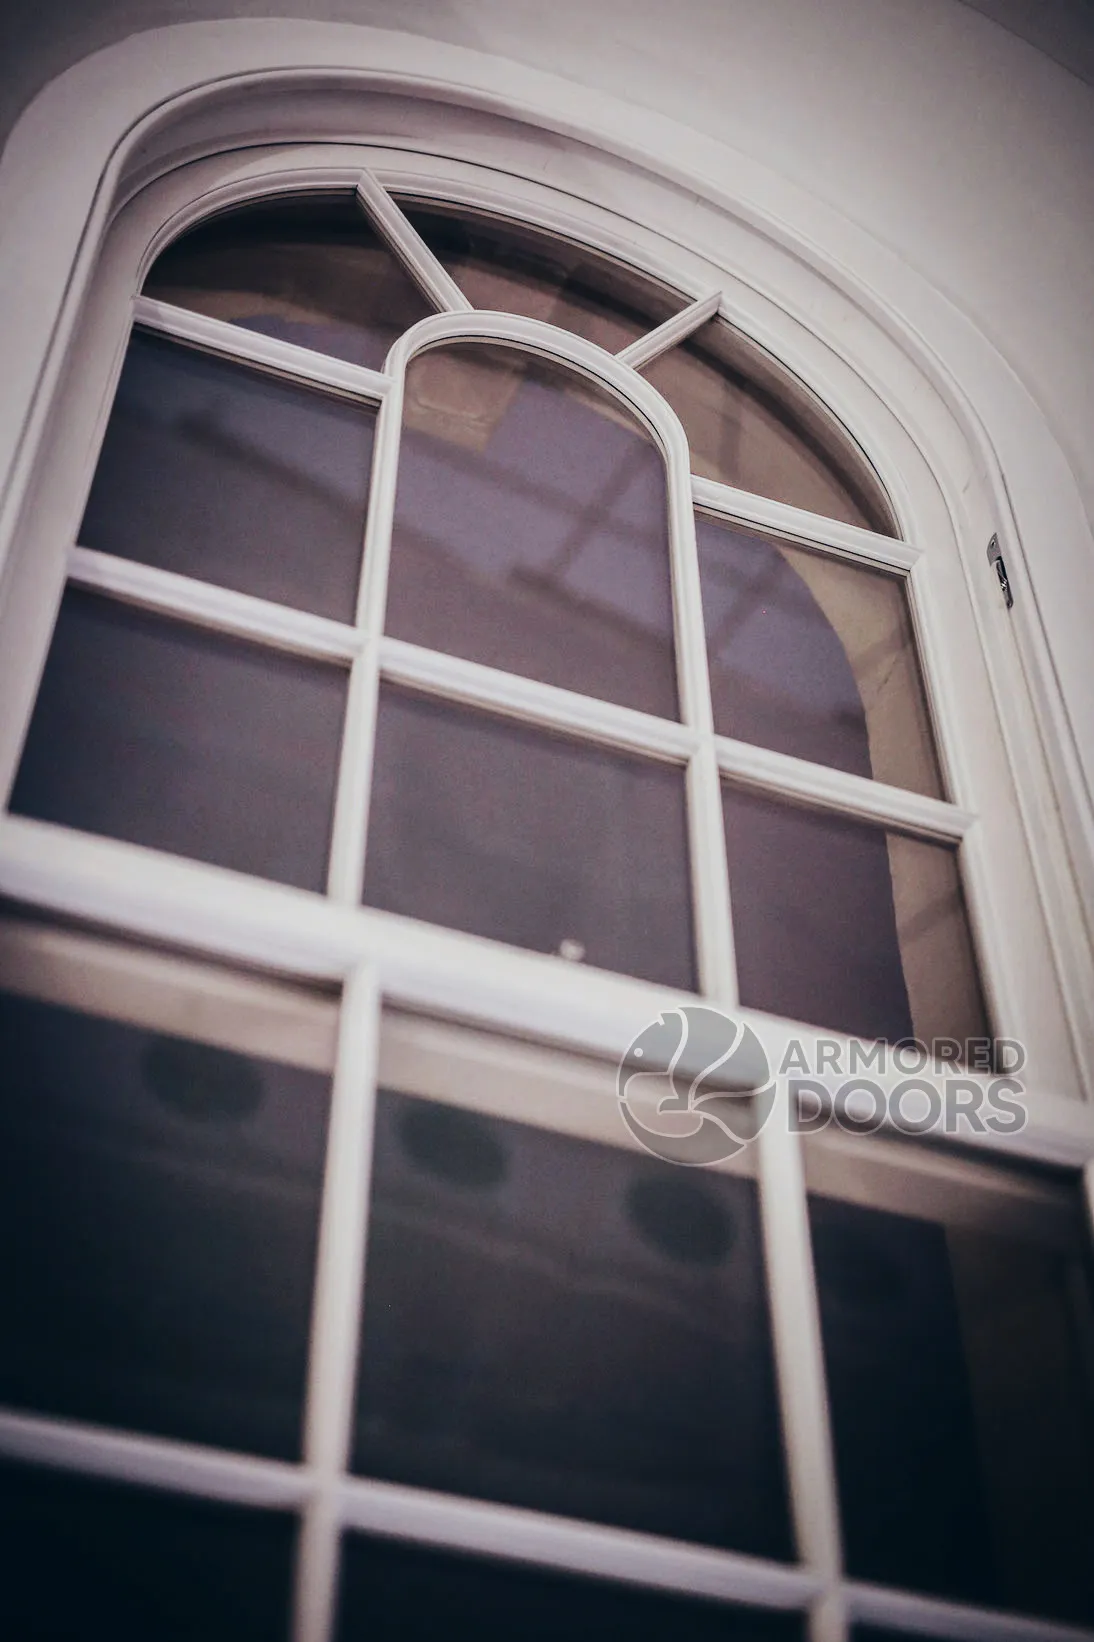 example of a residential window